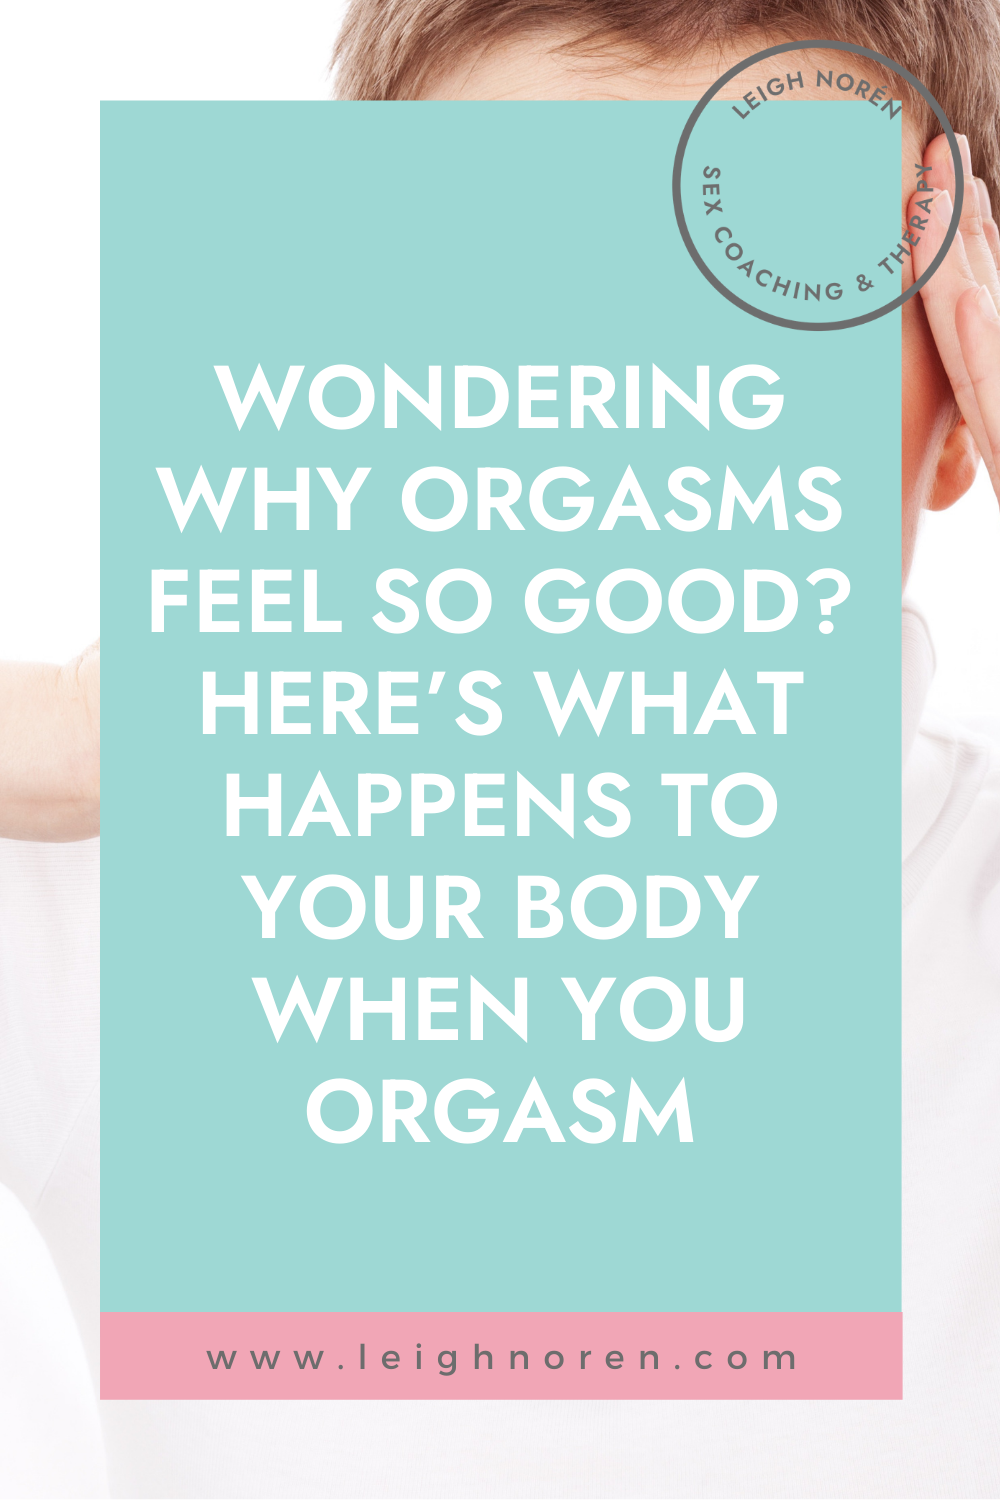 Wondering Why Orgasms Feel So Good? Here's What Happens to Your Body When You Orgasm